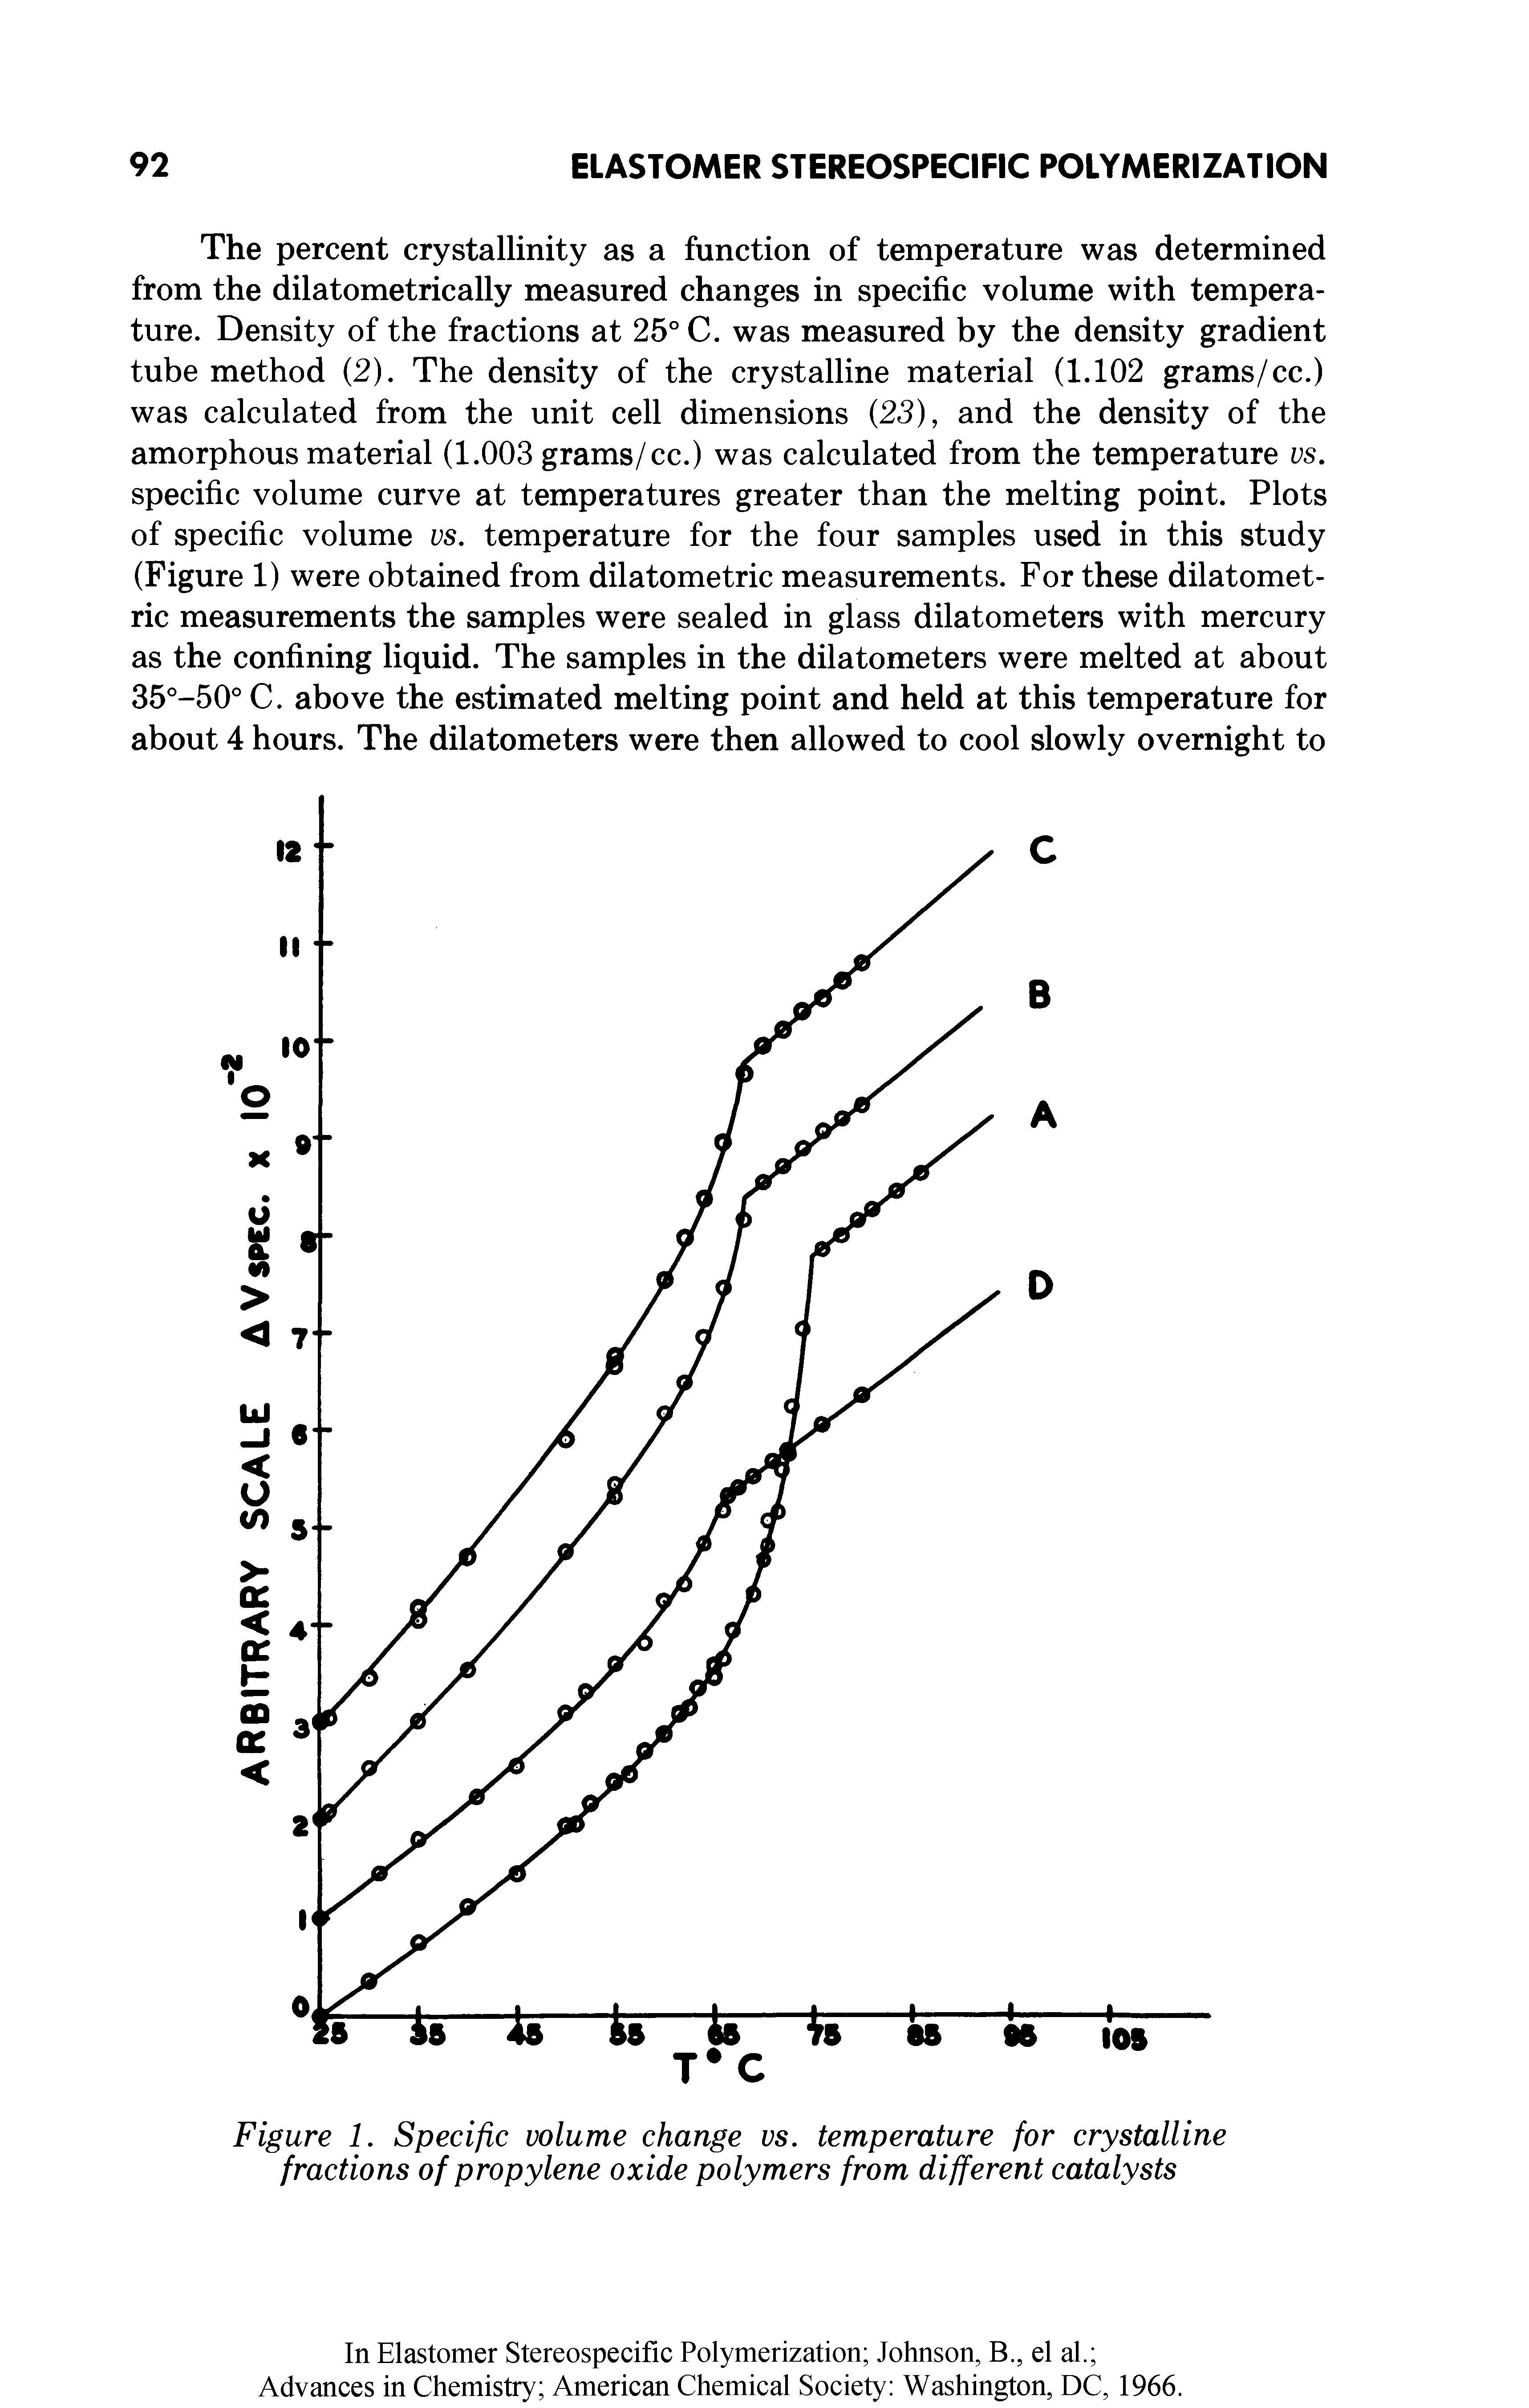 Figure 1. Specific volume change vs. temperature for crystalline fractions of propylene oxide polymers from different catalysts...